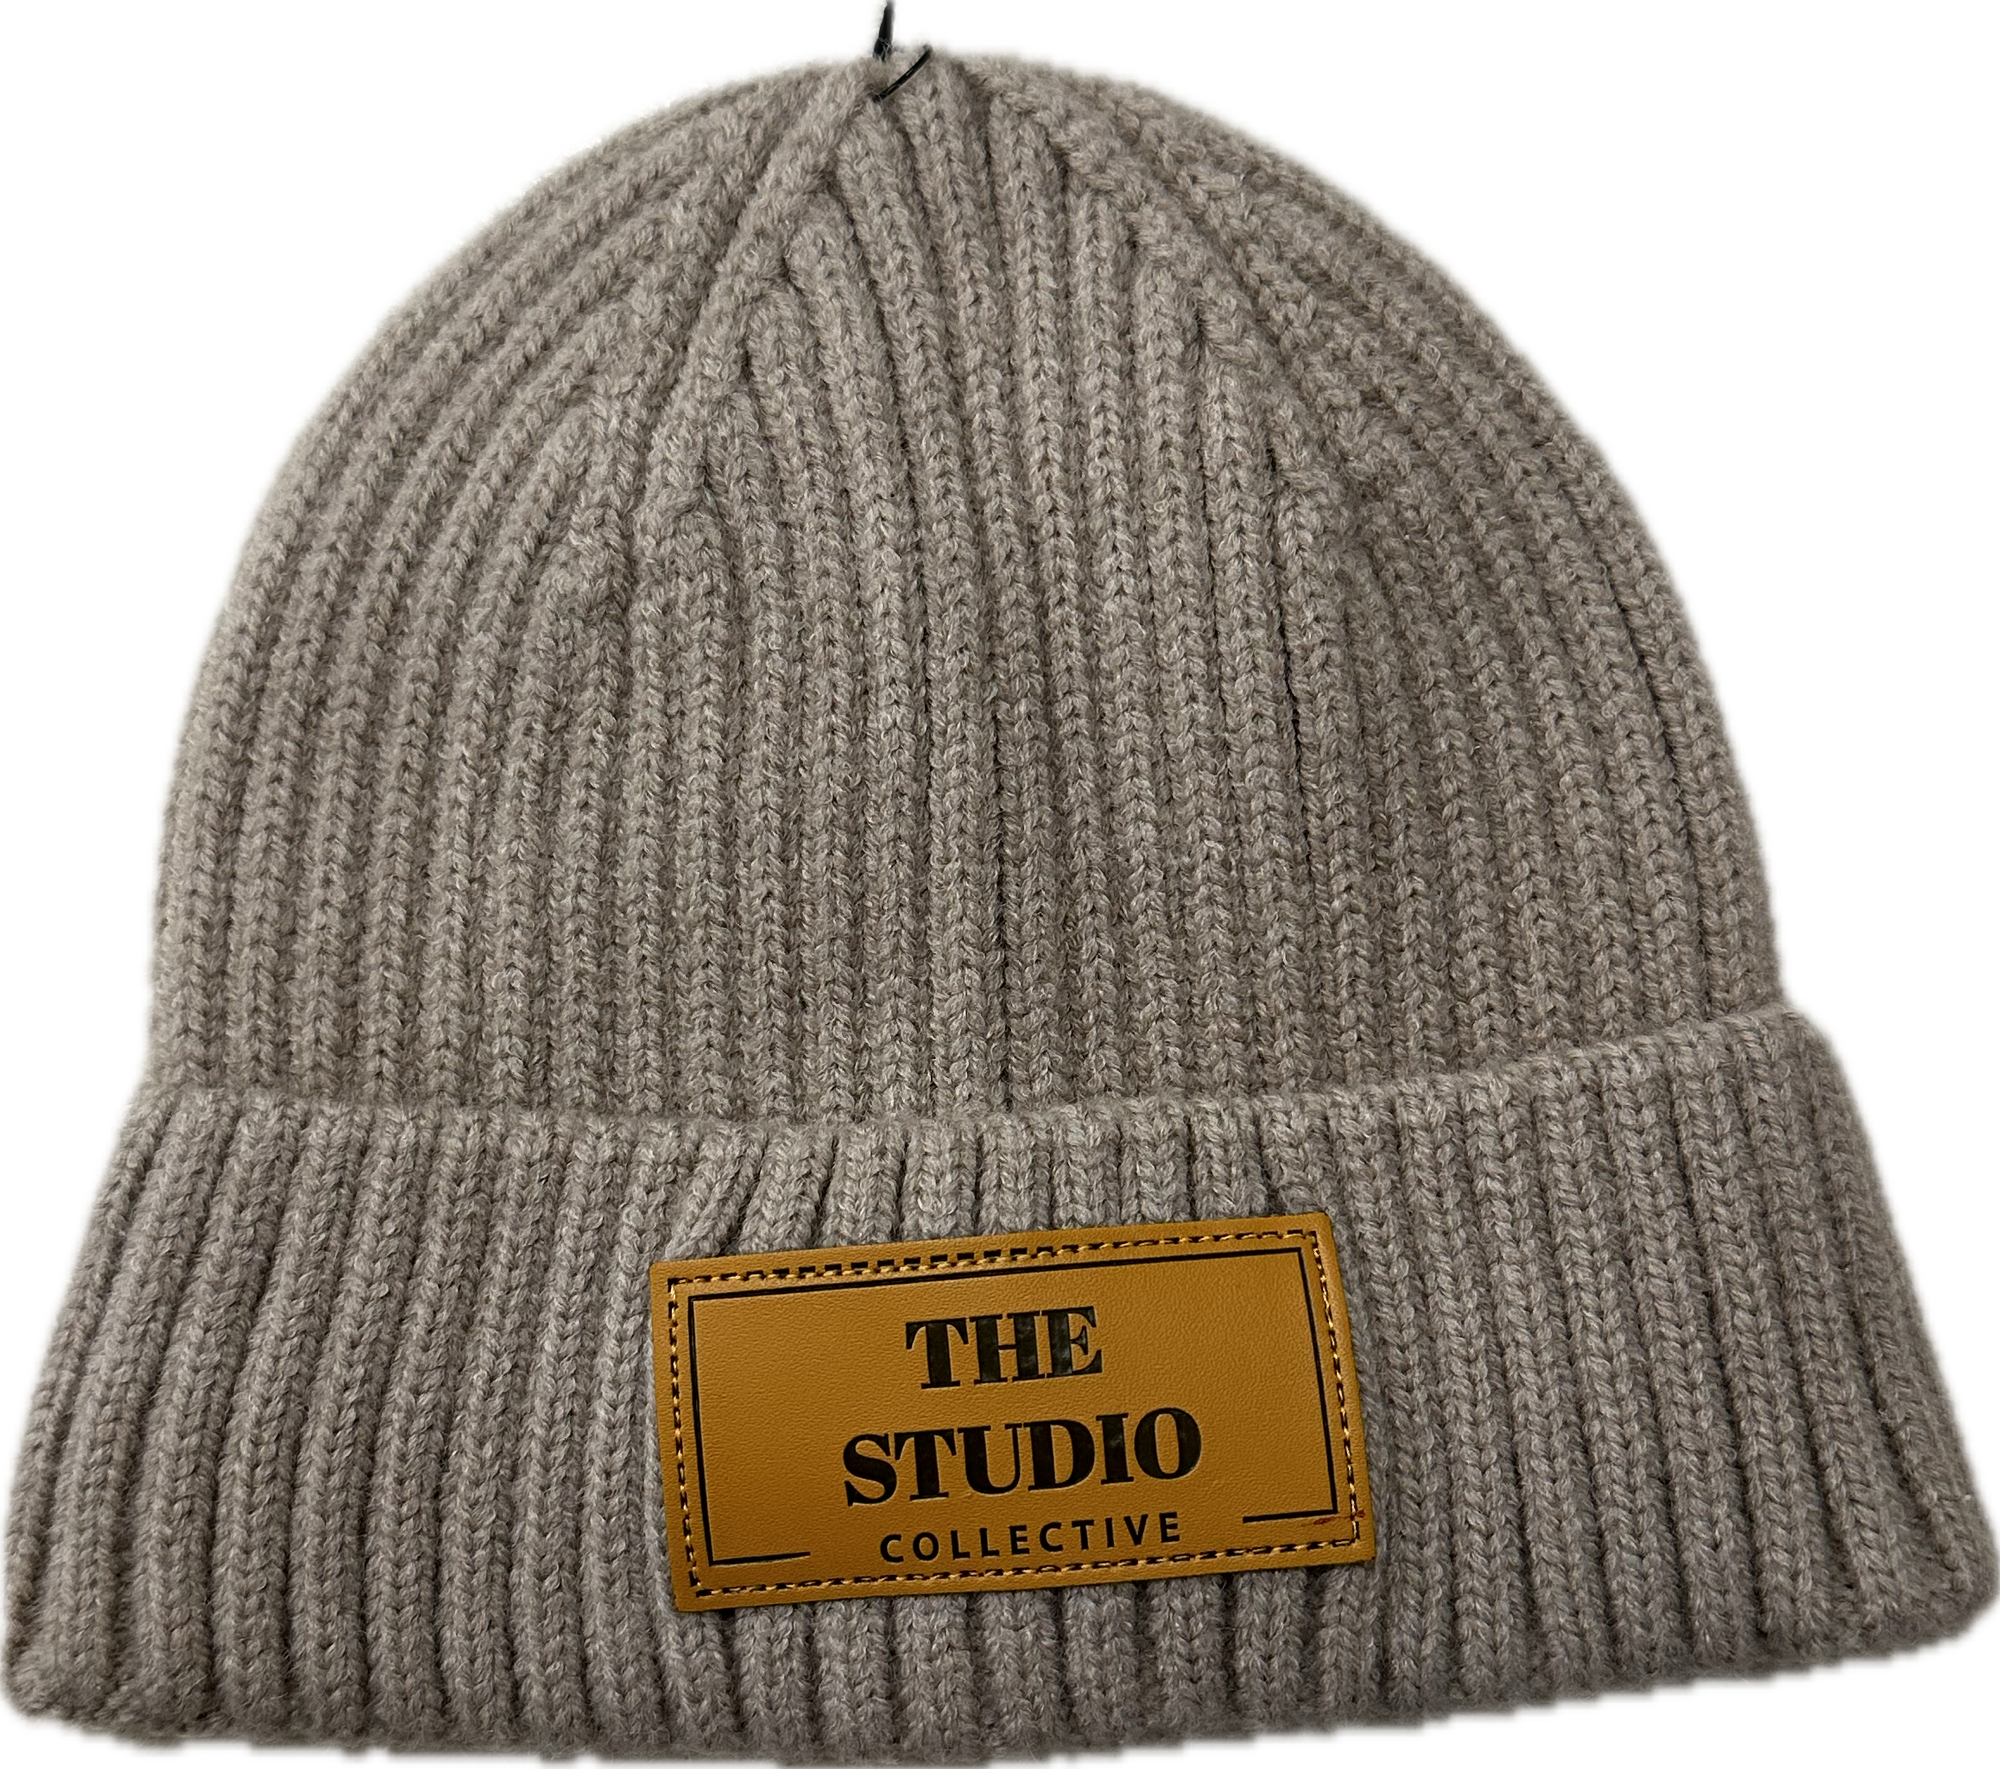 Beanie by The Studio Collective